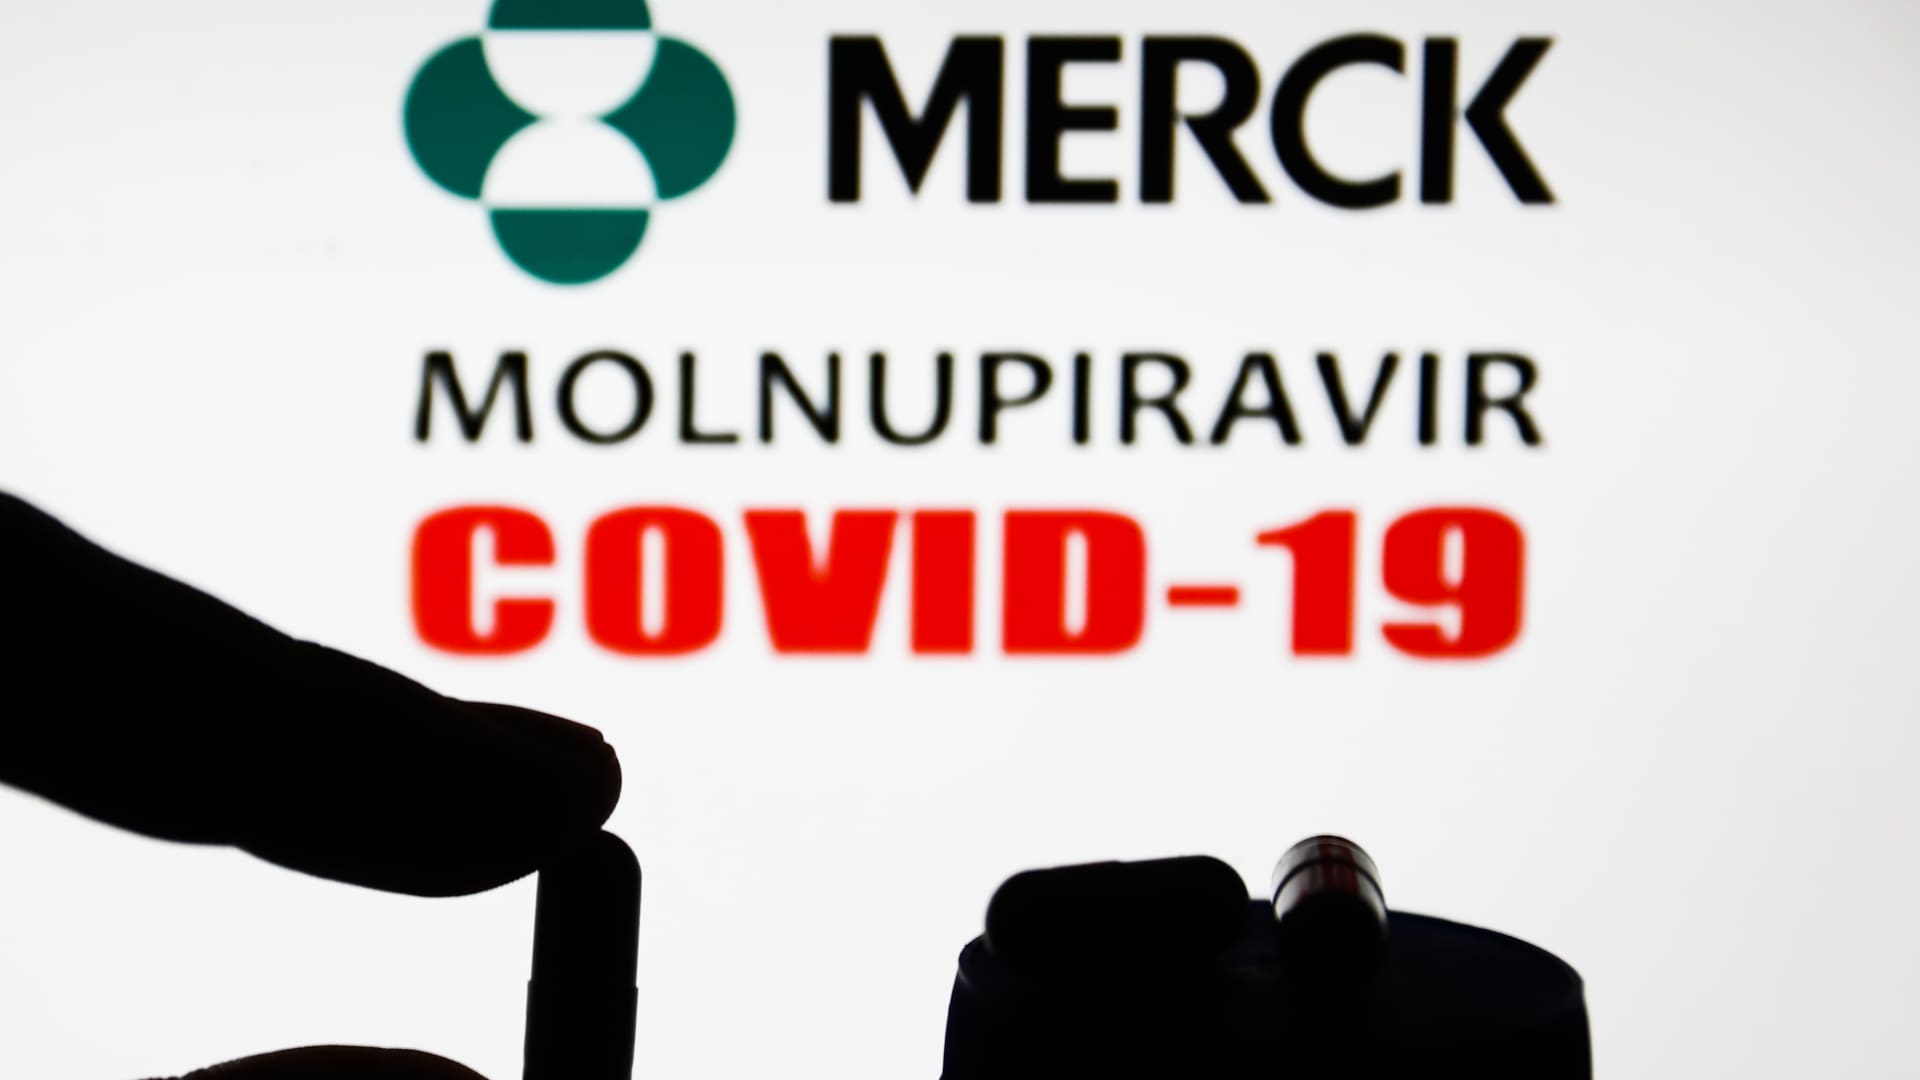 Merck sold $3.2 billion of its Covid oral antiviral treatment, driving first-quarter revenue growth